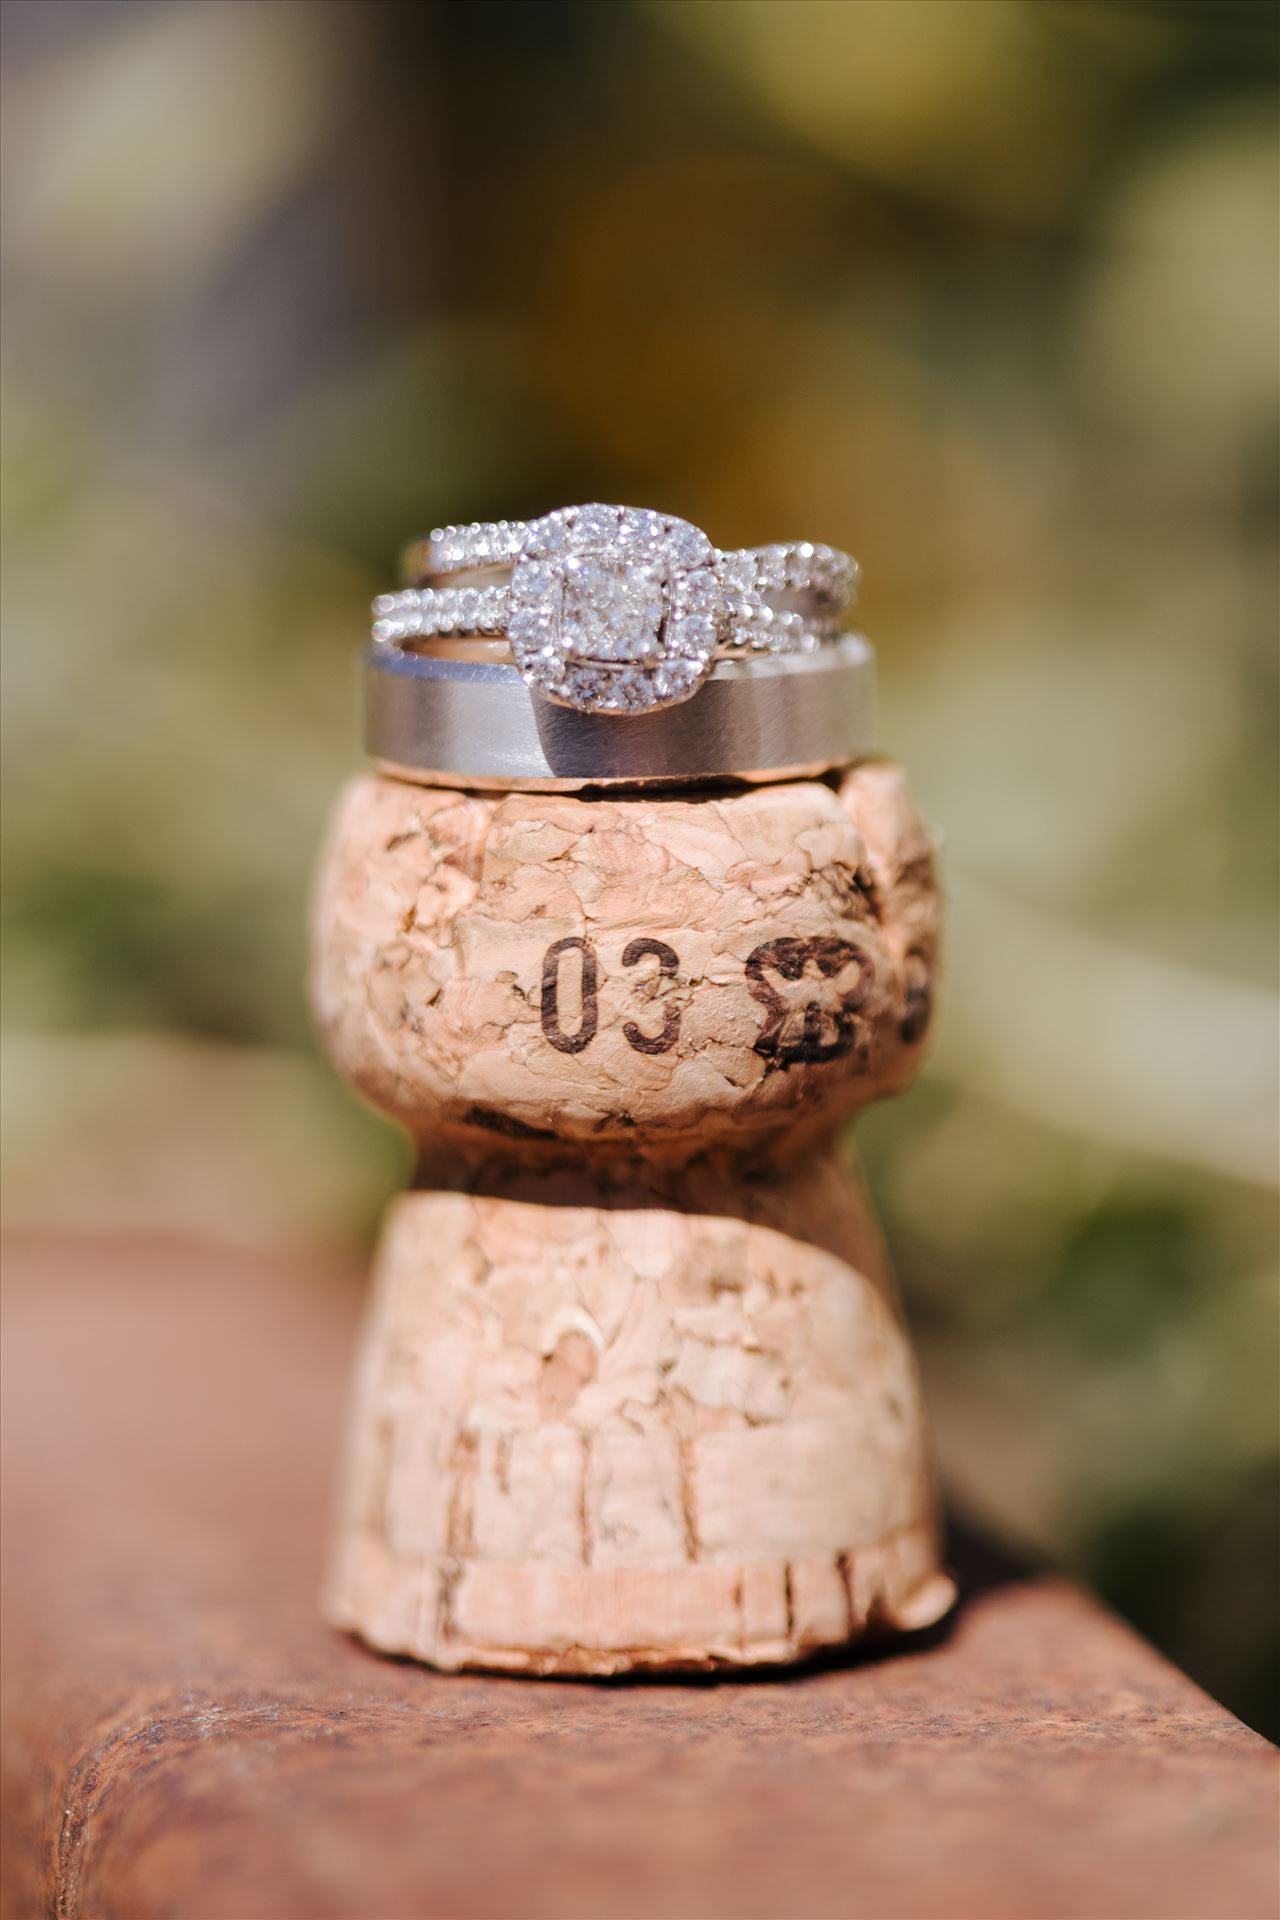 _Y9A6475.JPGTooth and Nail Winery elegant and formal wedding in Paso Robles California wine country by Mirror's Edge Photography, San Luis Obispo County Wedding Photographer. Wedding rings on wine cork